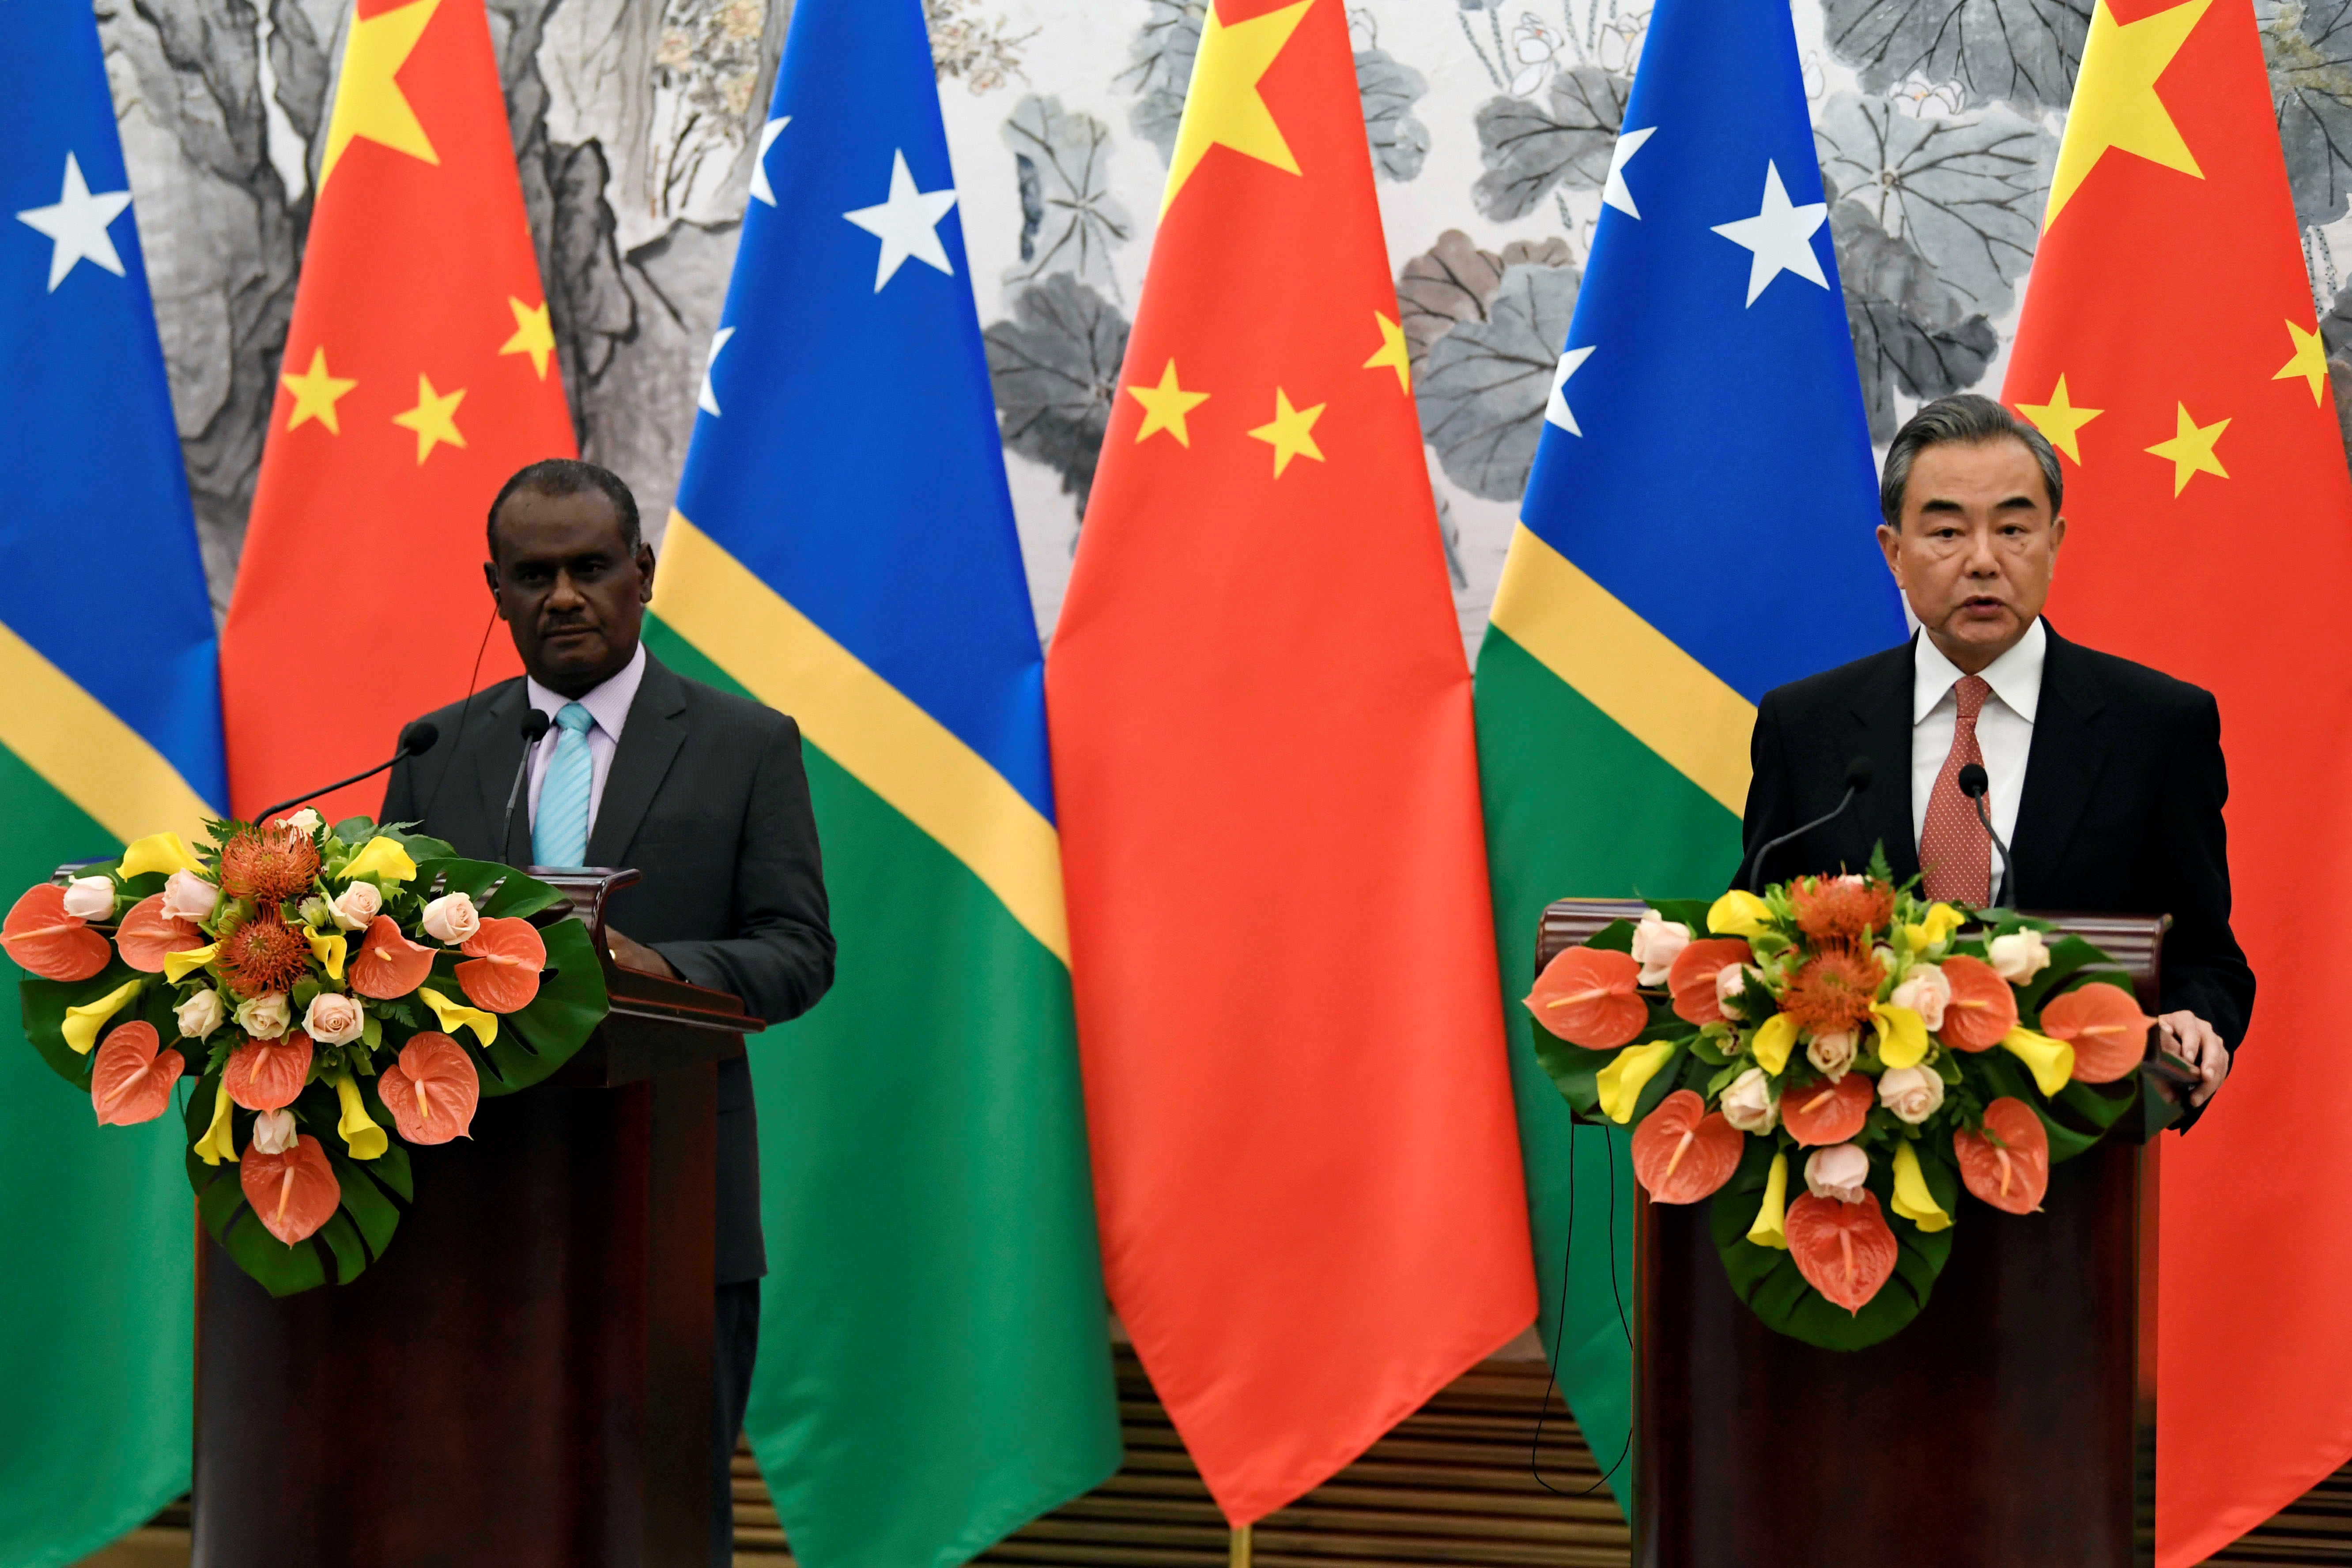 Solomon Islands Foreign Minister Jeremiah Manele and Chinese State Councilor and Foreign Minister Wang Yi hold joint news conference at the Diaoyutai State Guesthouse in Beijing